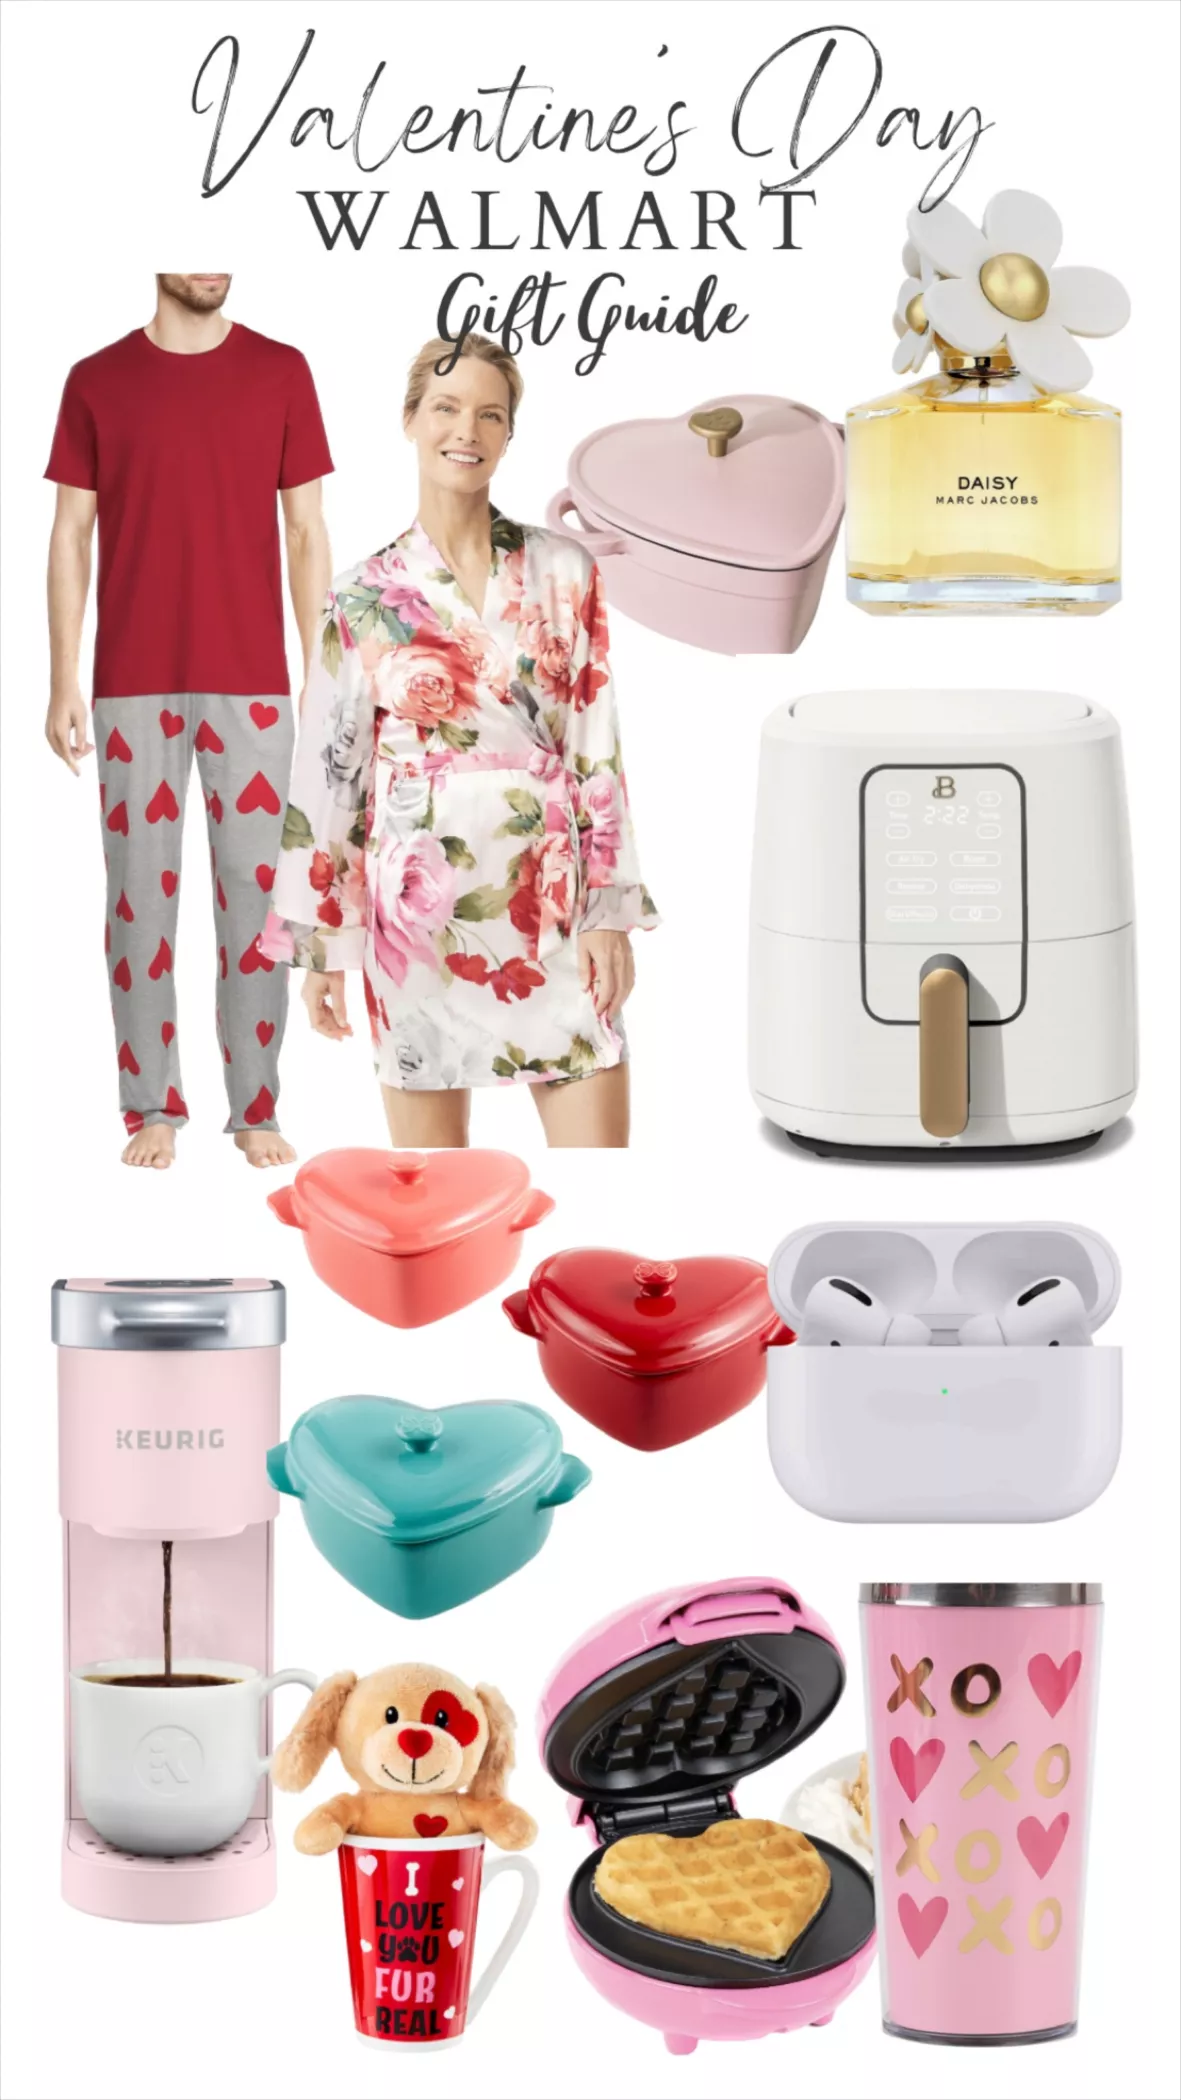 Small Appliance Gifts for Her on Valentine's Day